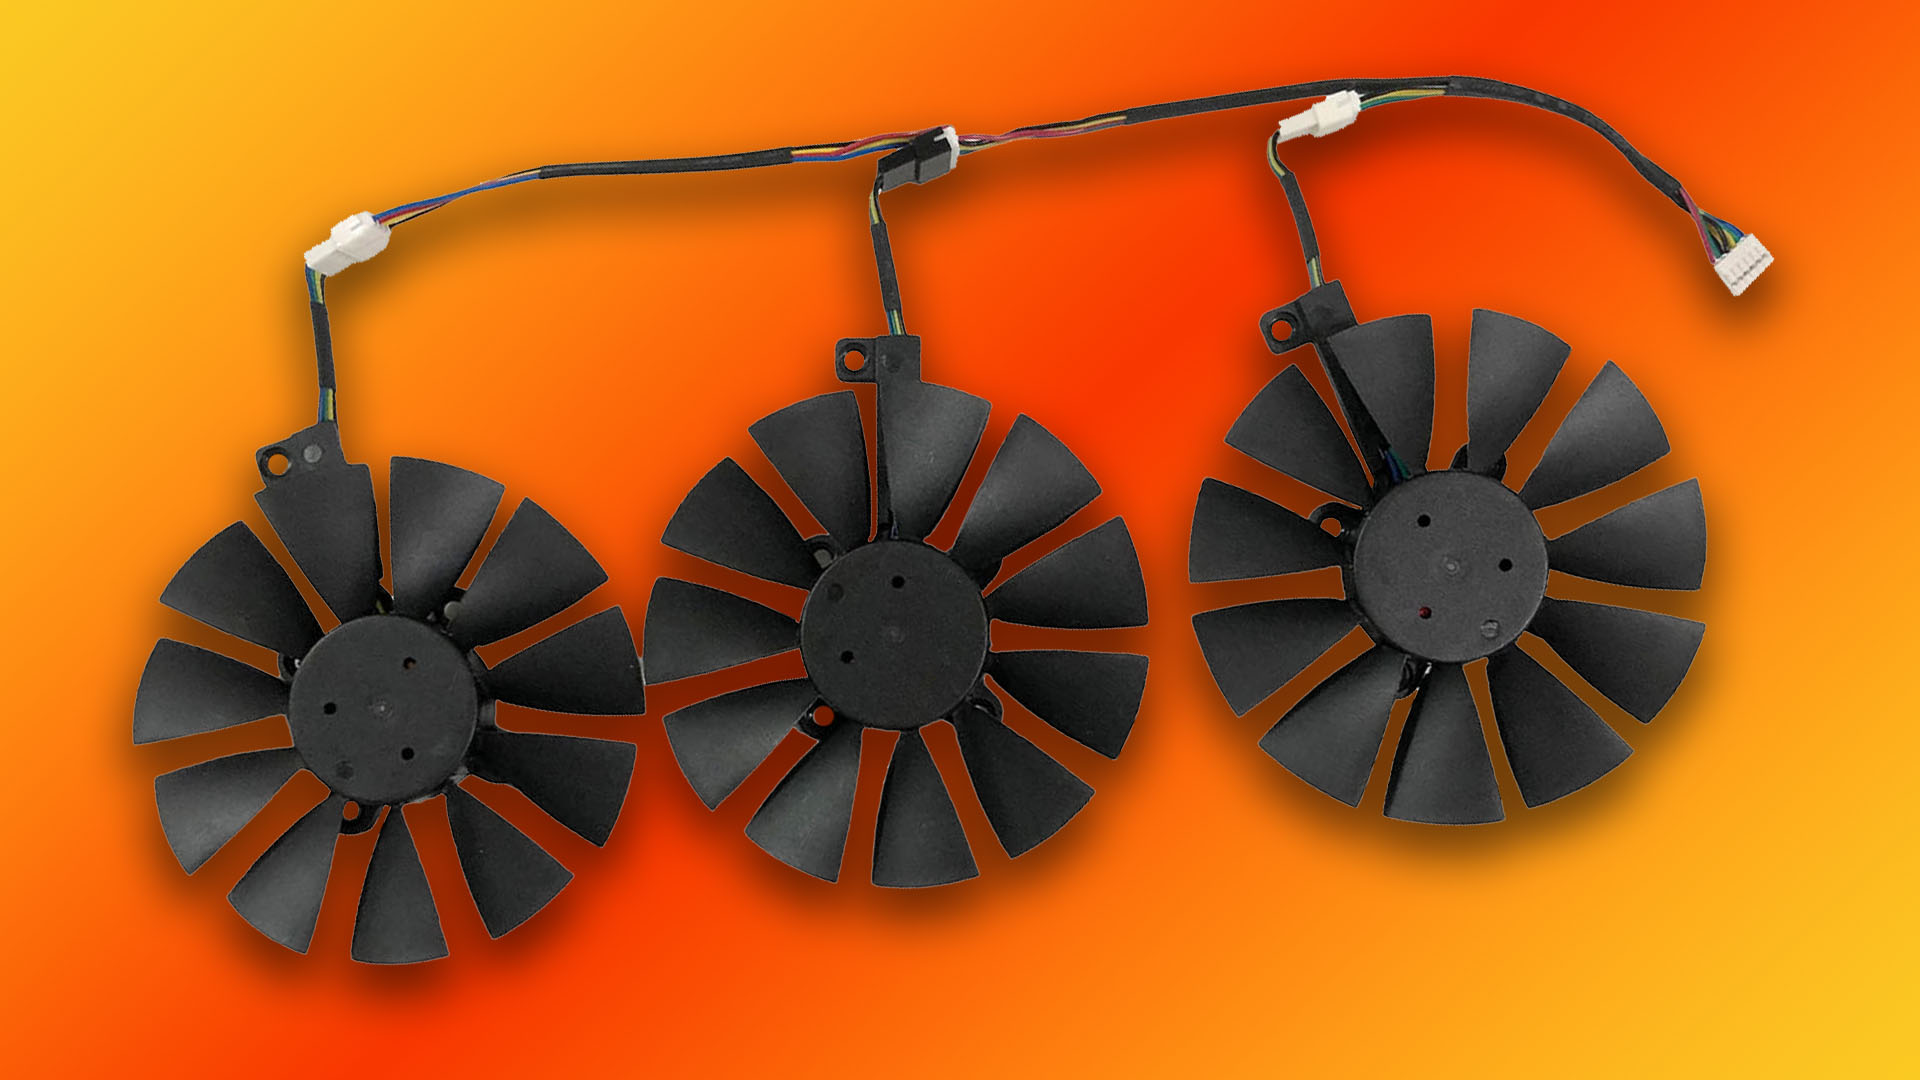 How to lower GPU temp: Replacement graphics card fans